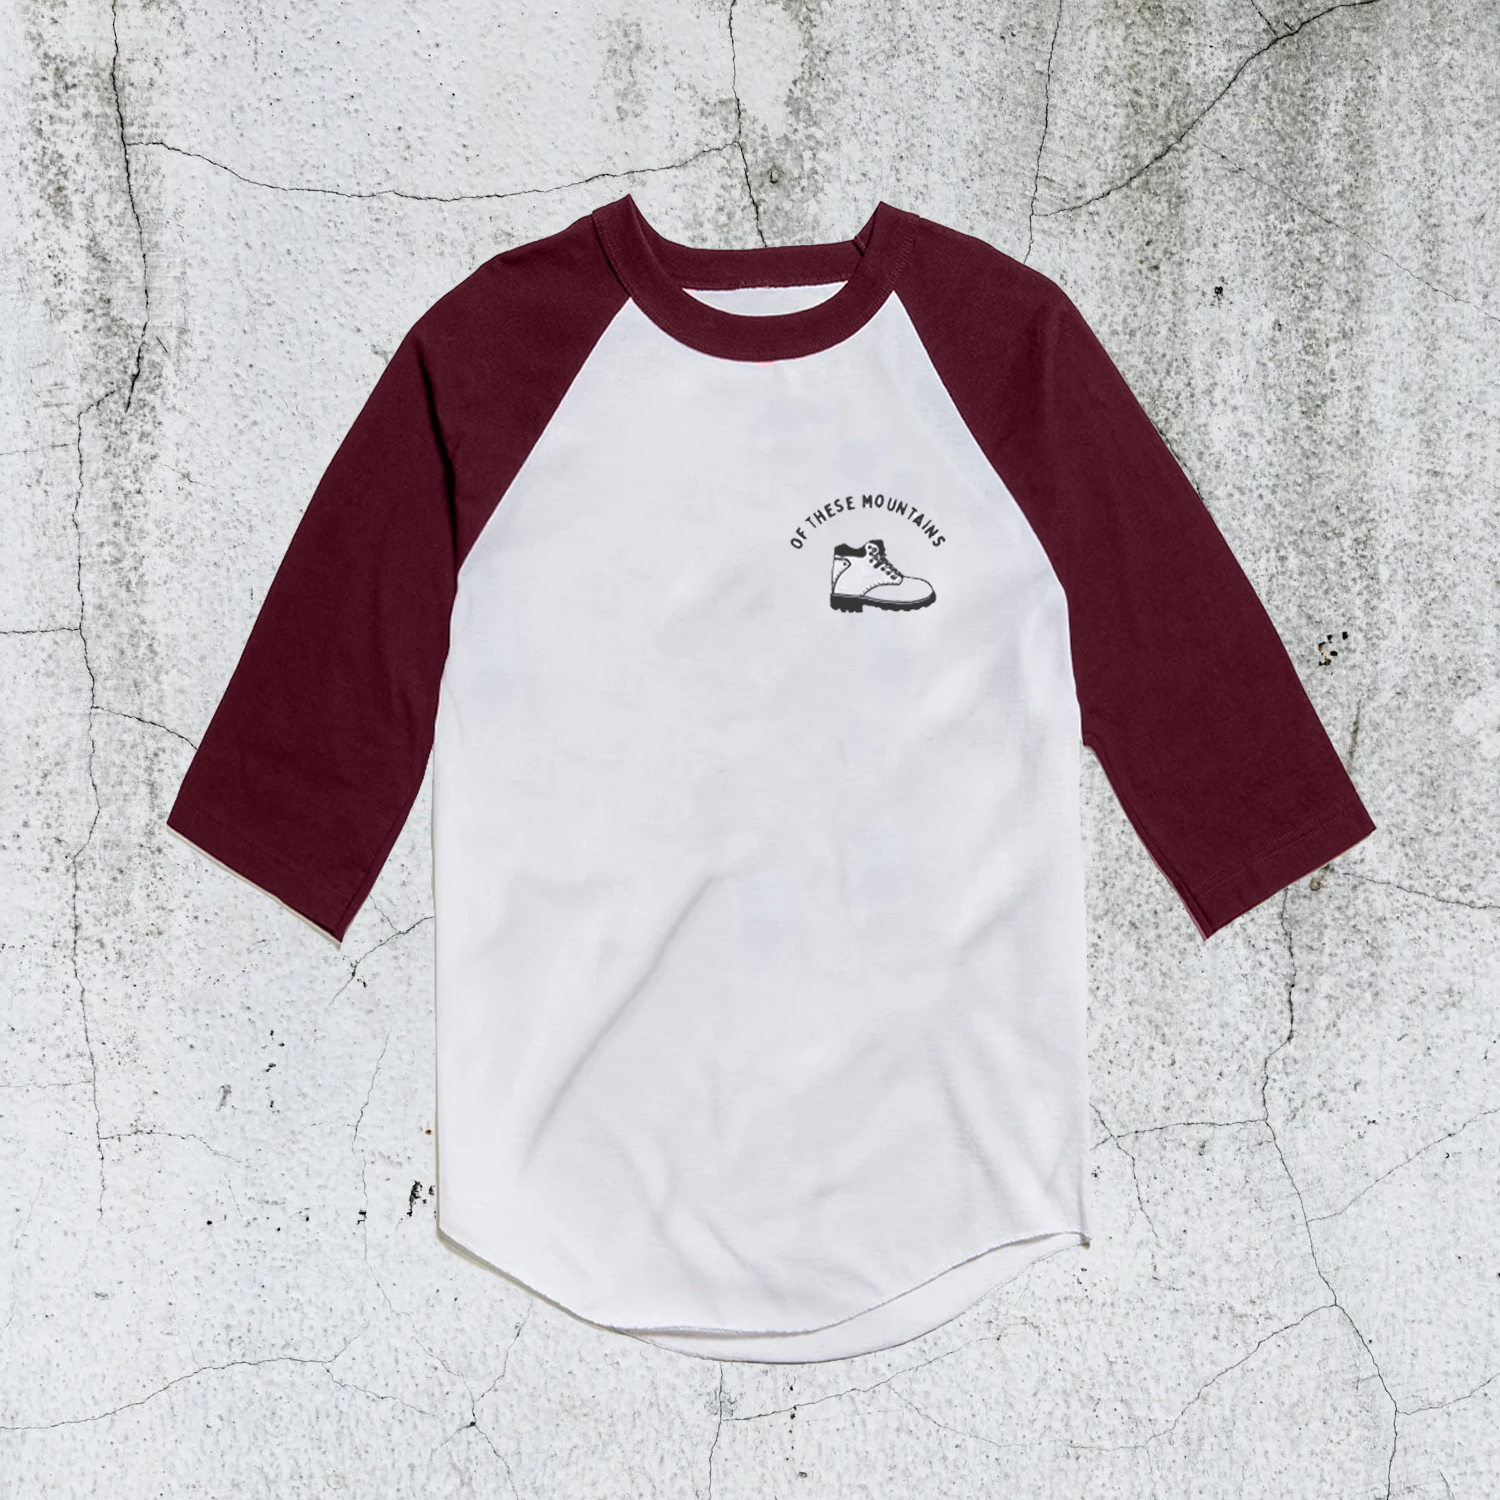 Of These Mountains It's All Good in the Woods Kids Baseball Tee